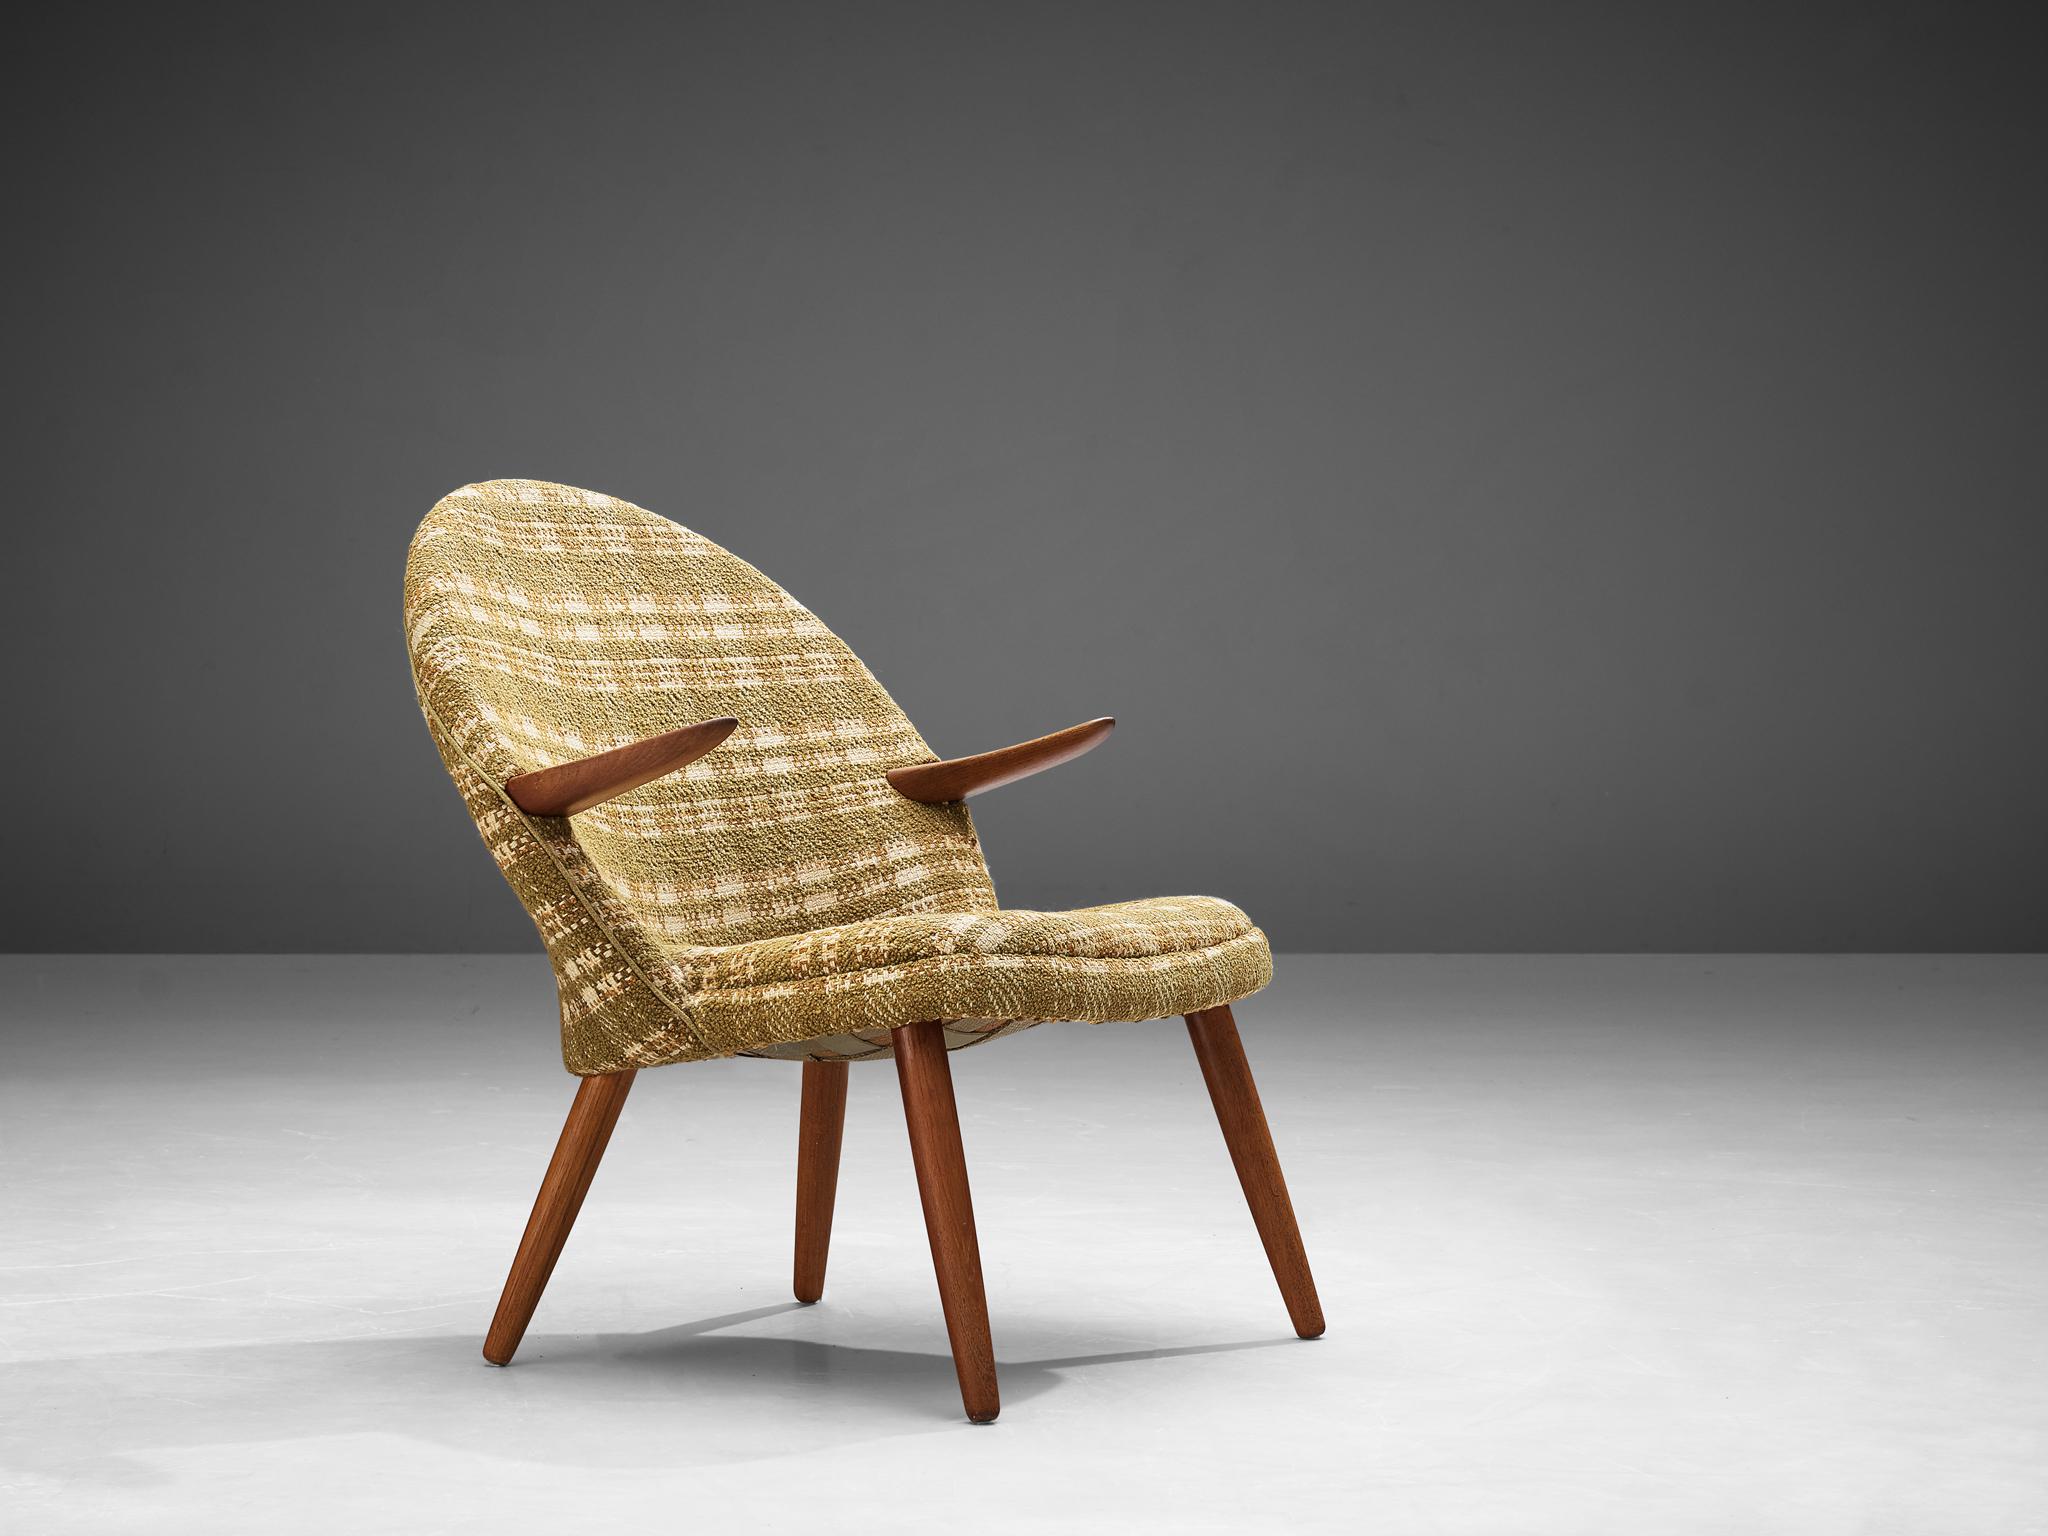 Svend Aage Eriksen, easy chair model ‘penguin’, teak, fabric, Denmark, circa. 1960

Stunning Danish lounge chair designed by Svend Aage Eriksen. The chair has a sculptural quality and light feeling. This is especially created by the floating teak